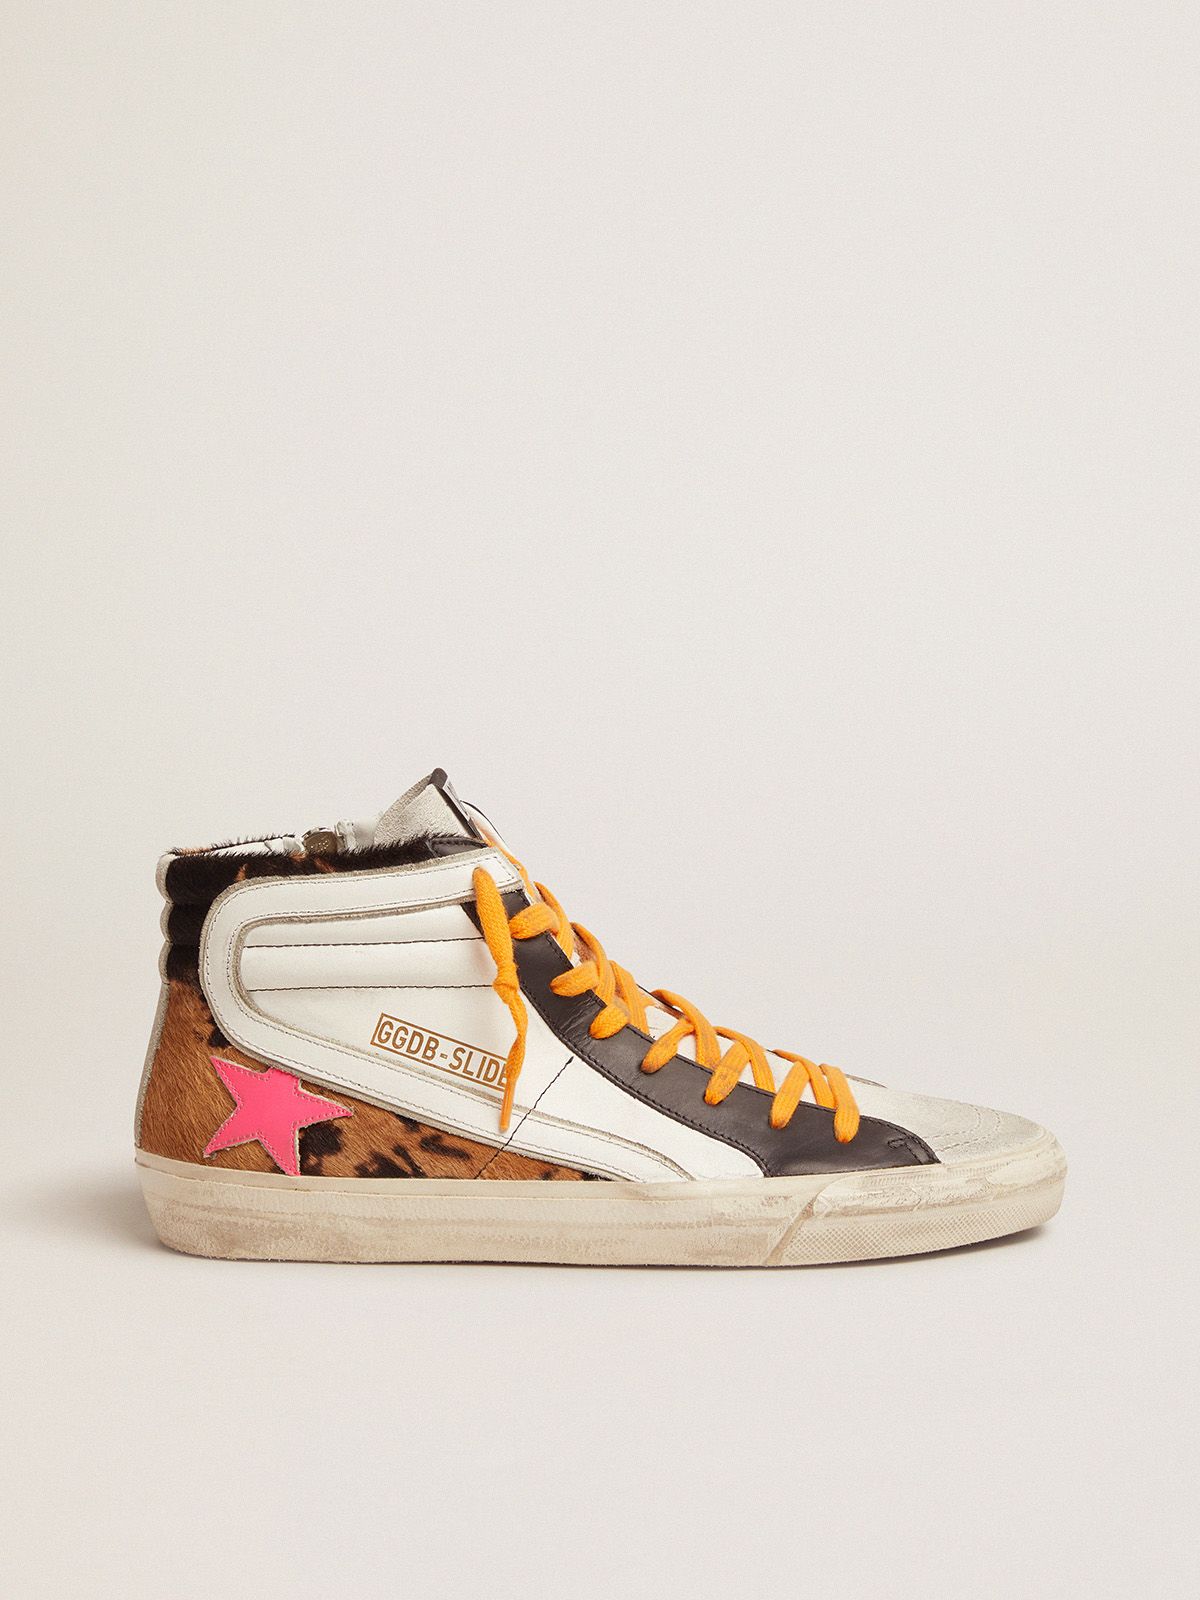 Slide sneakers in pony skin, leather and suede with orange laces and a fuchsia star | 